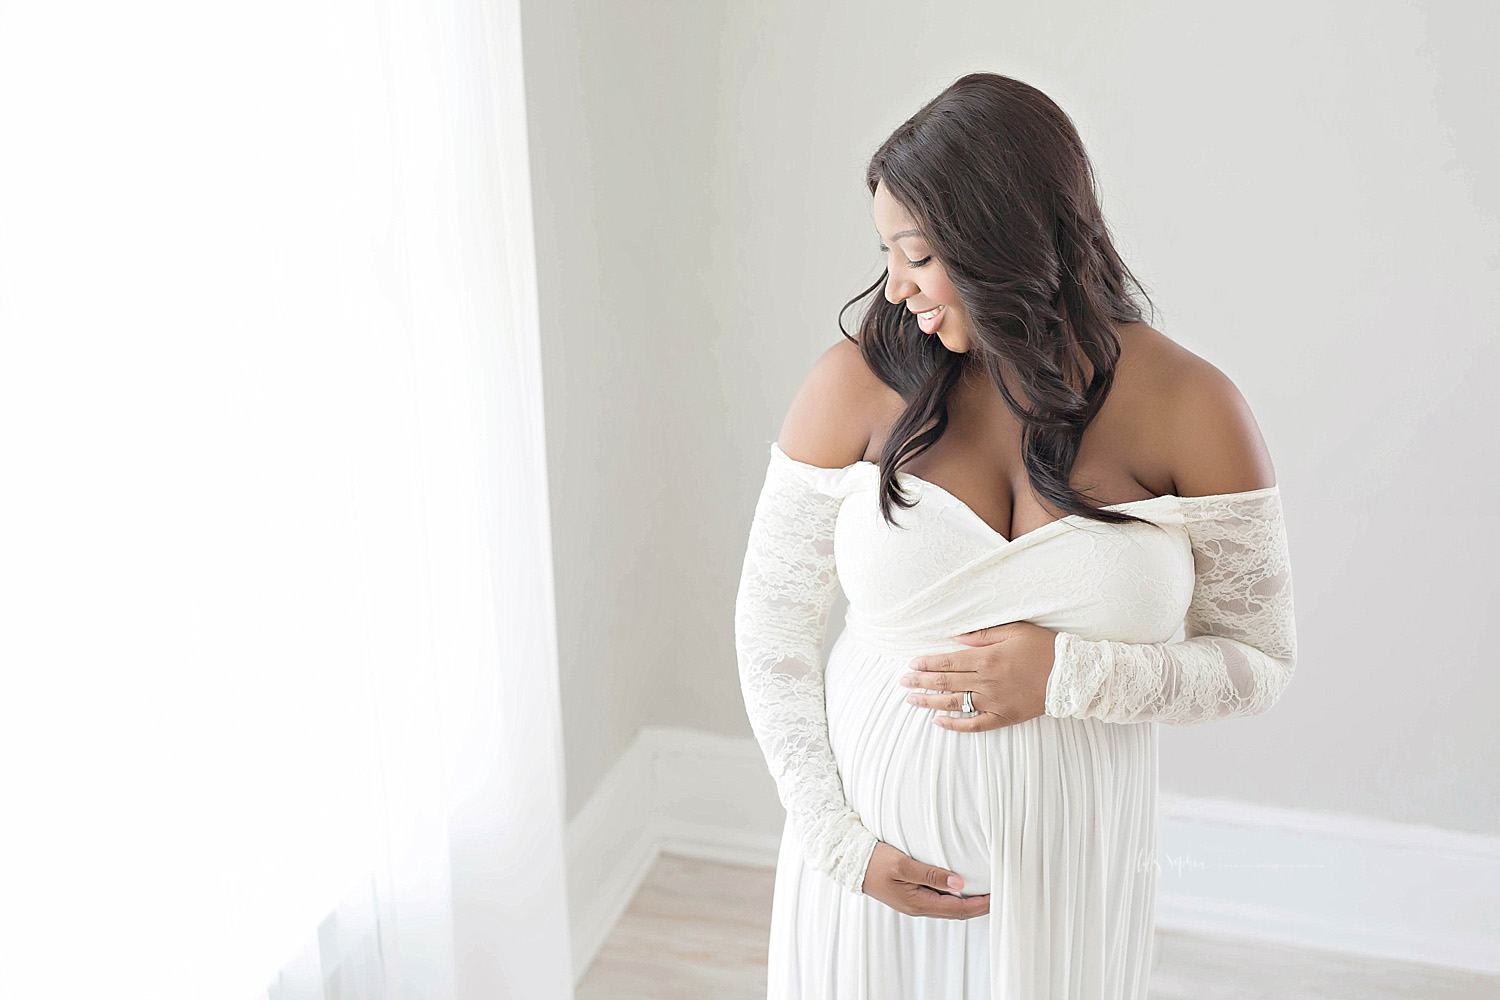  Image of a pregnant African American woman, smiling, in a cream, off the shoulder dress with lace sleeves.&nbsp; 